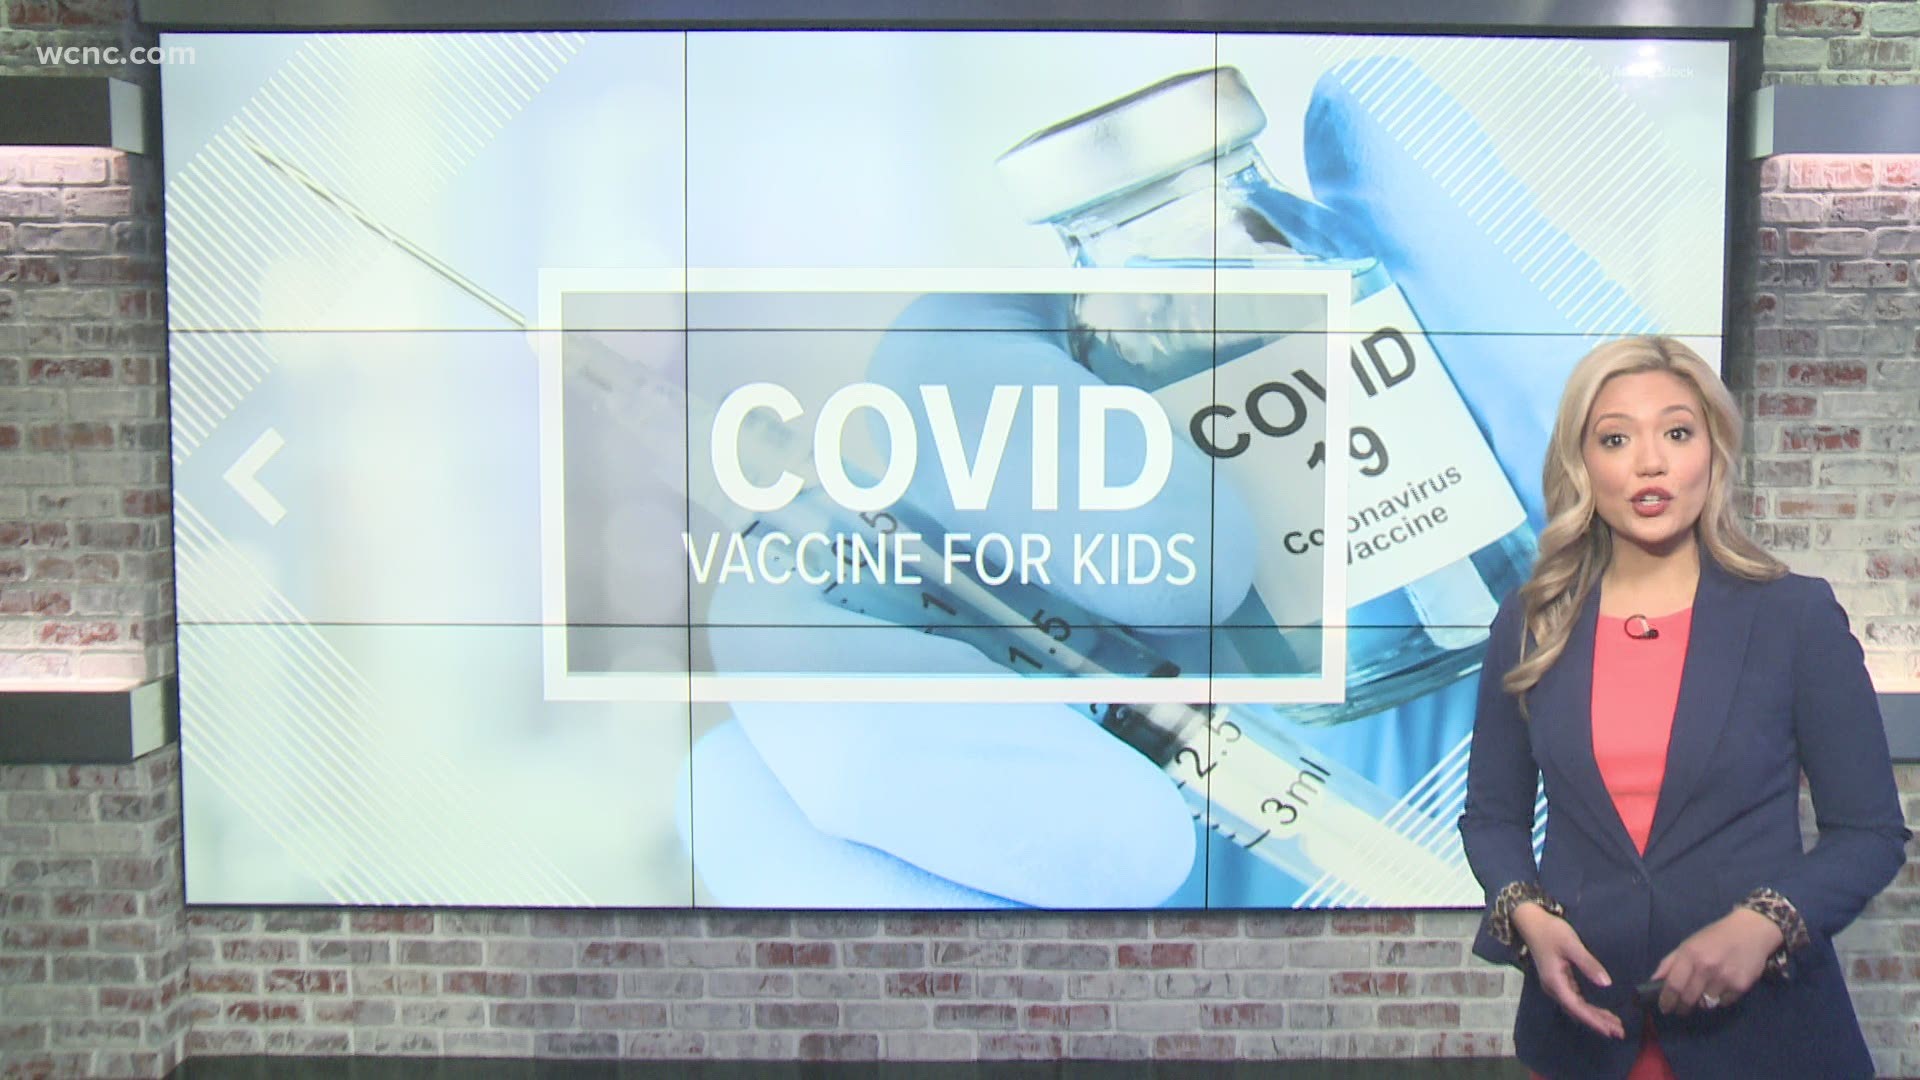 Parents must give consent for their child to receive the vaccine.